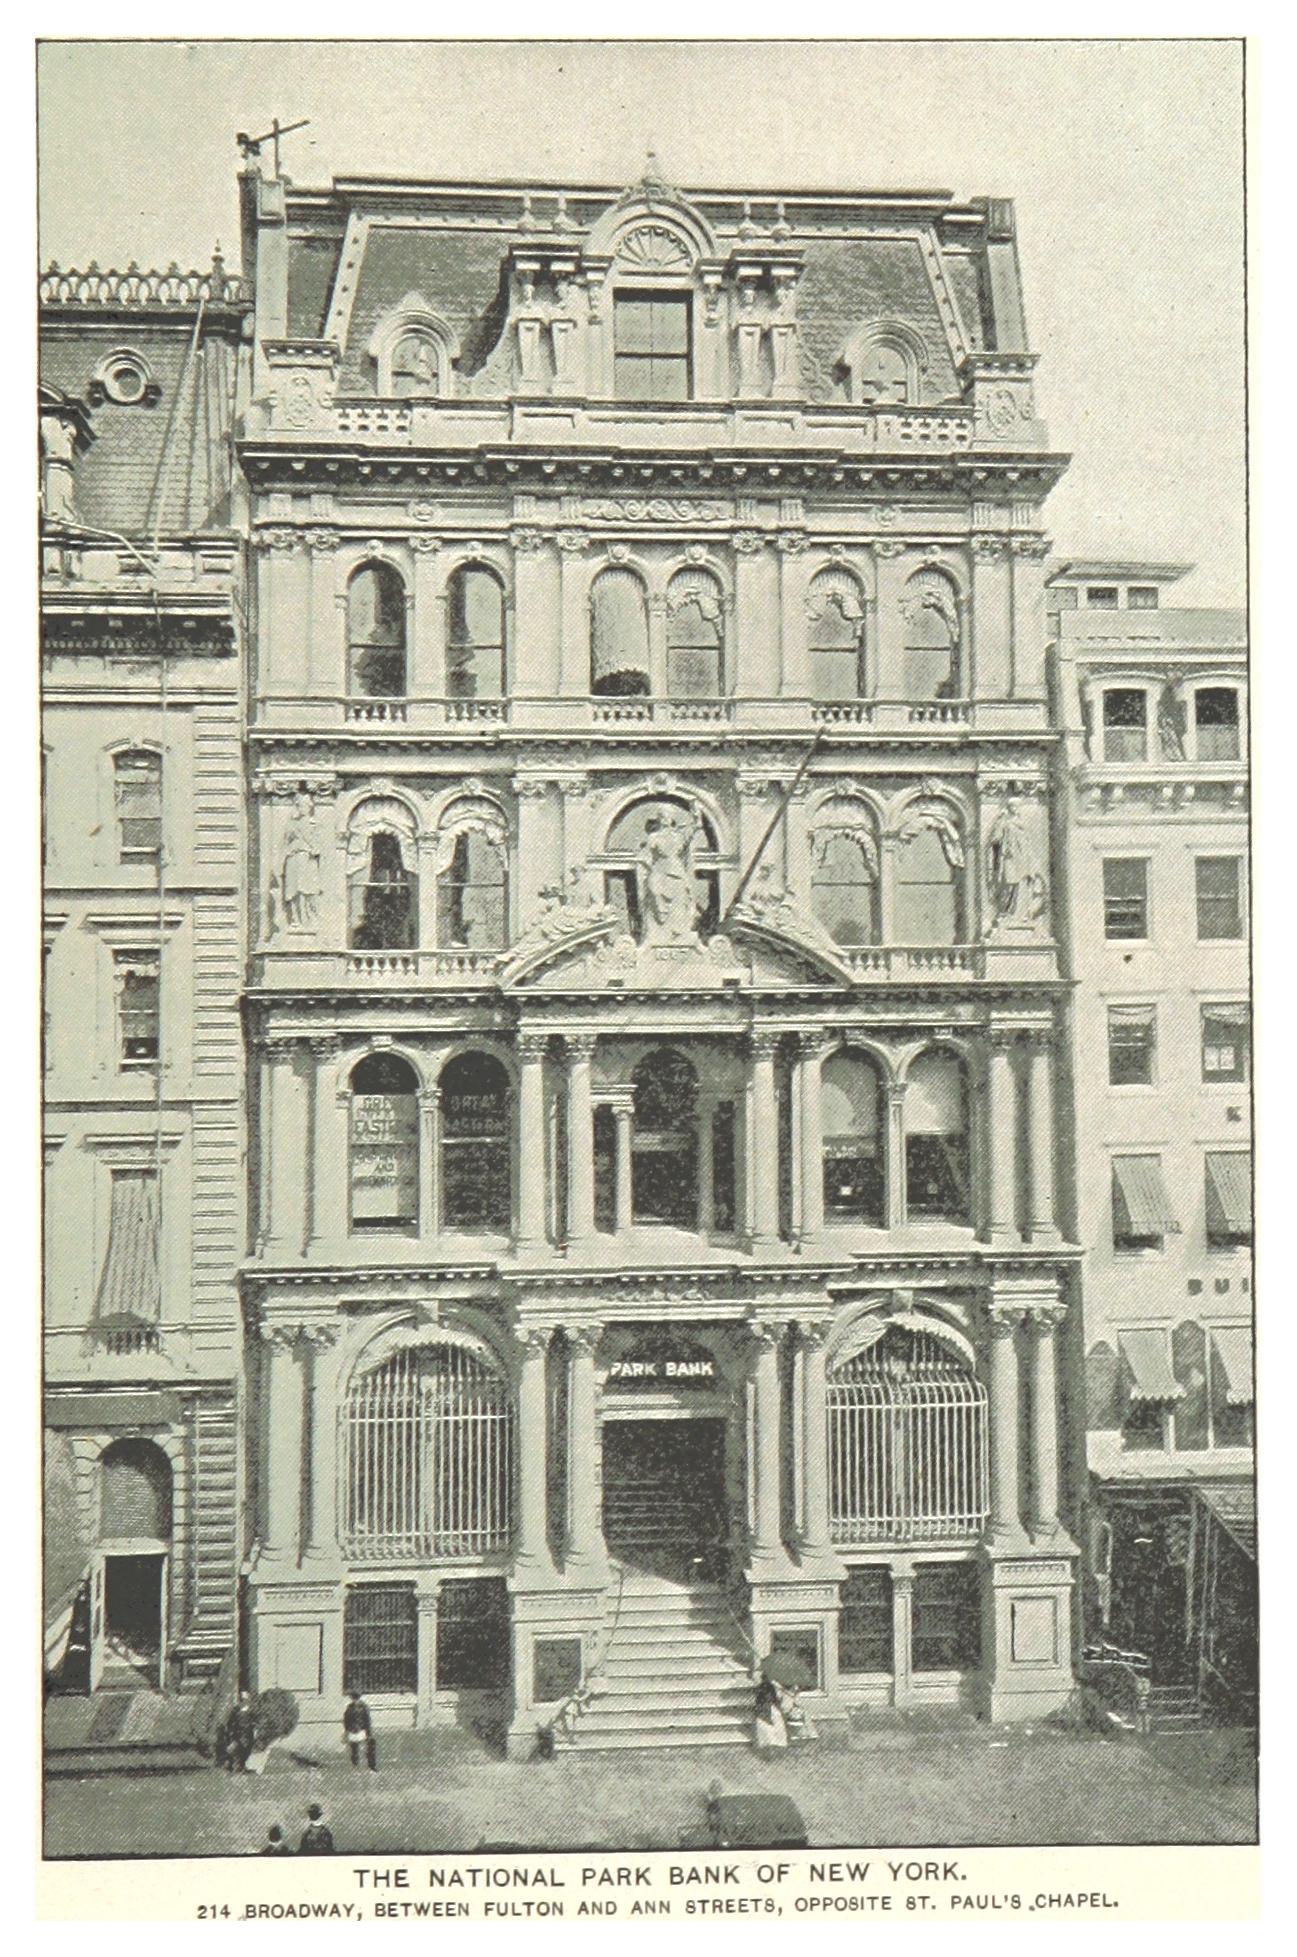 (King1893NYC)_pg739_THE_NATIONAL_PARK_BANK_OF_NEW_YORK._214_BROADWAY,_BETWEEN_FULTON_AND_ANN_S...jpg